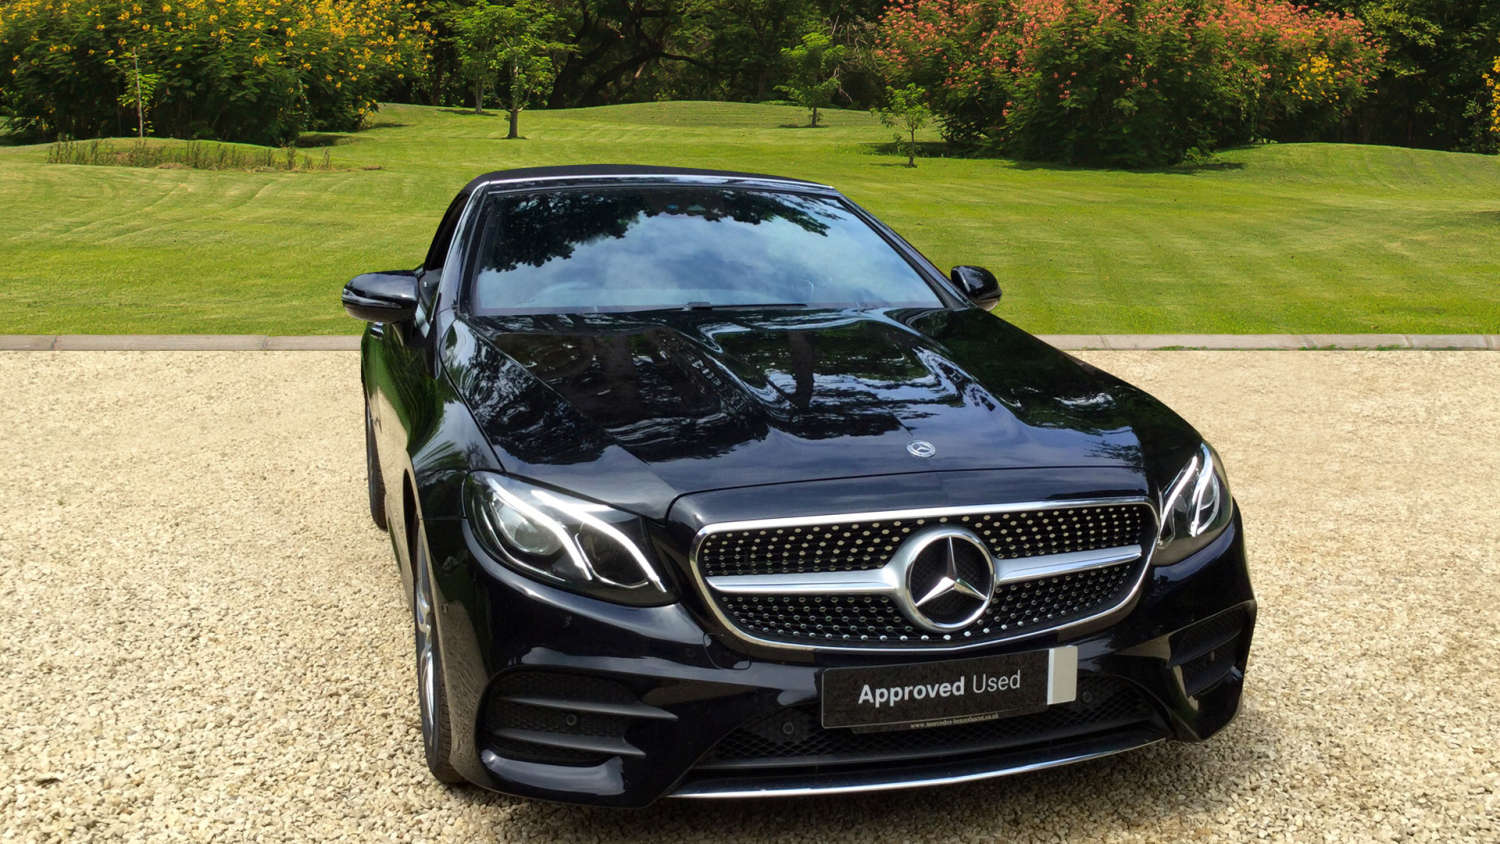 This Week's Top 5 Used Cars - Mercedes Benz